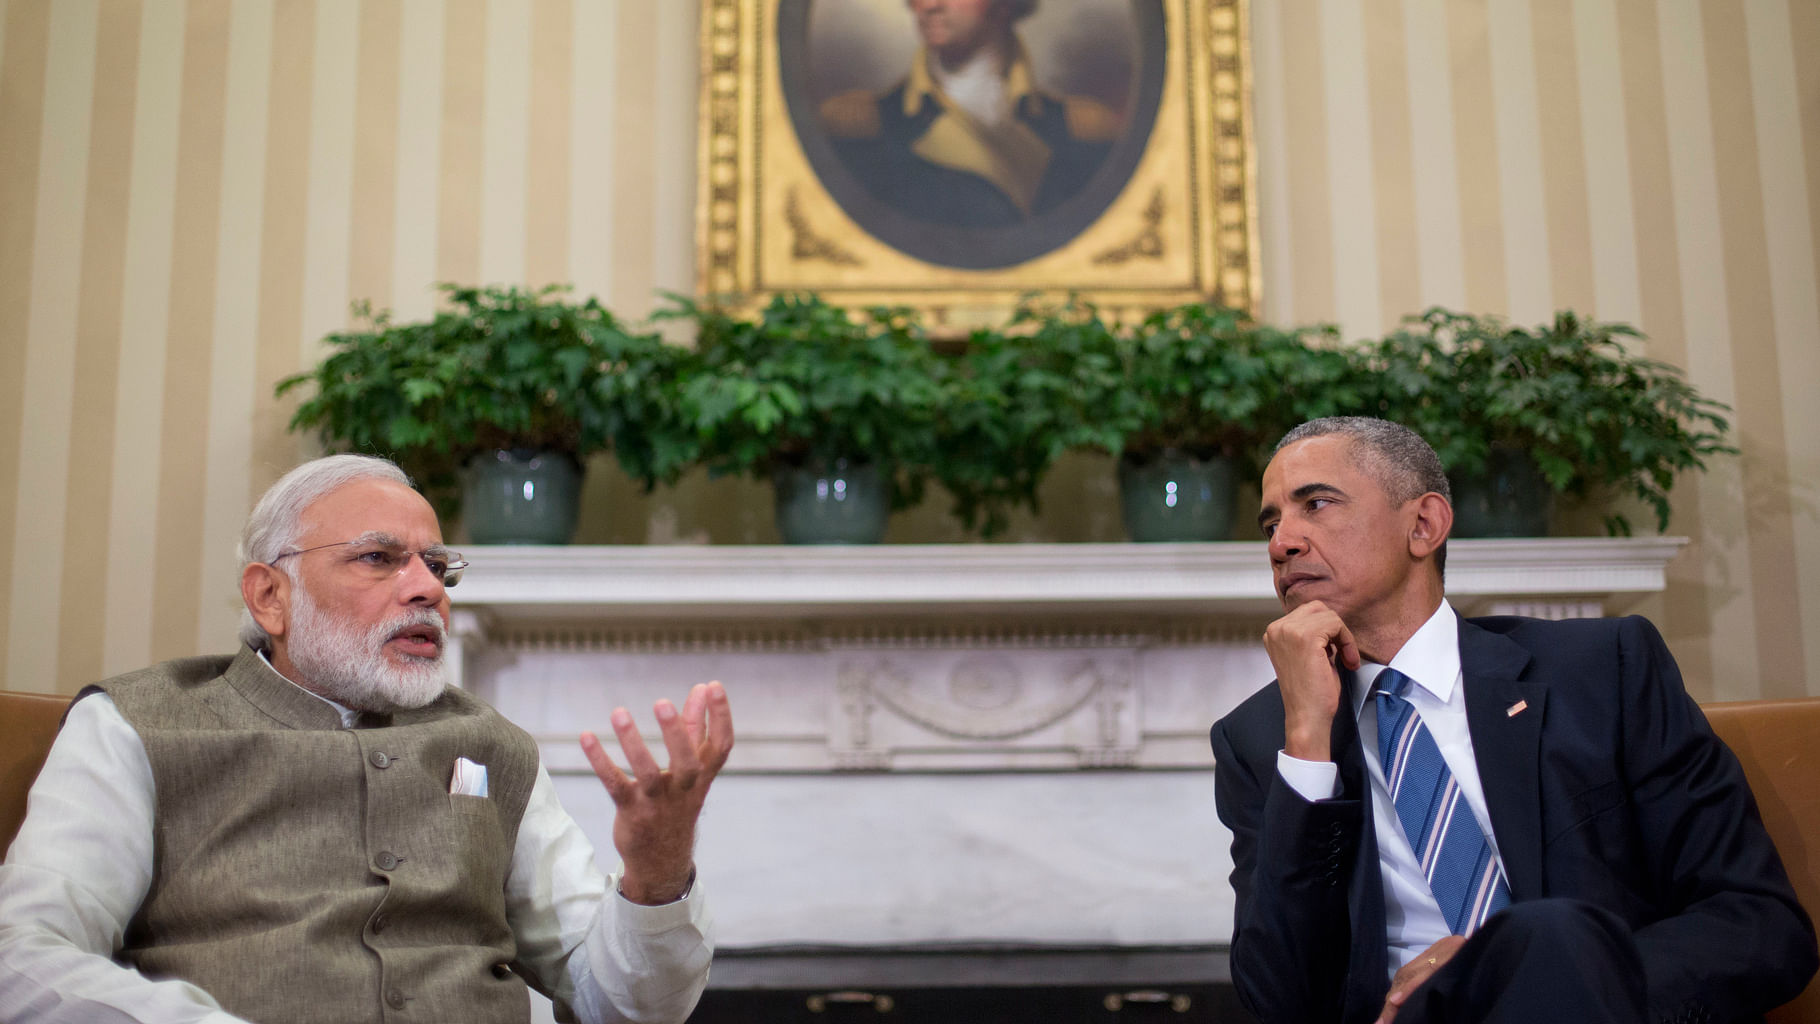 President Barack Obama listens as Indian Prime Minister India Narendra Modi speaks to members of the media during their meeting in the Oval Office. (Photo: AP)